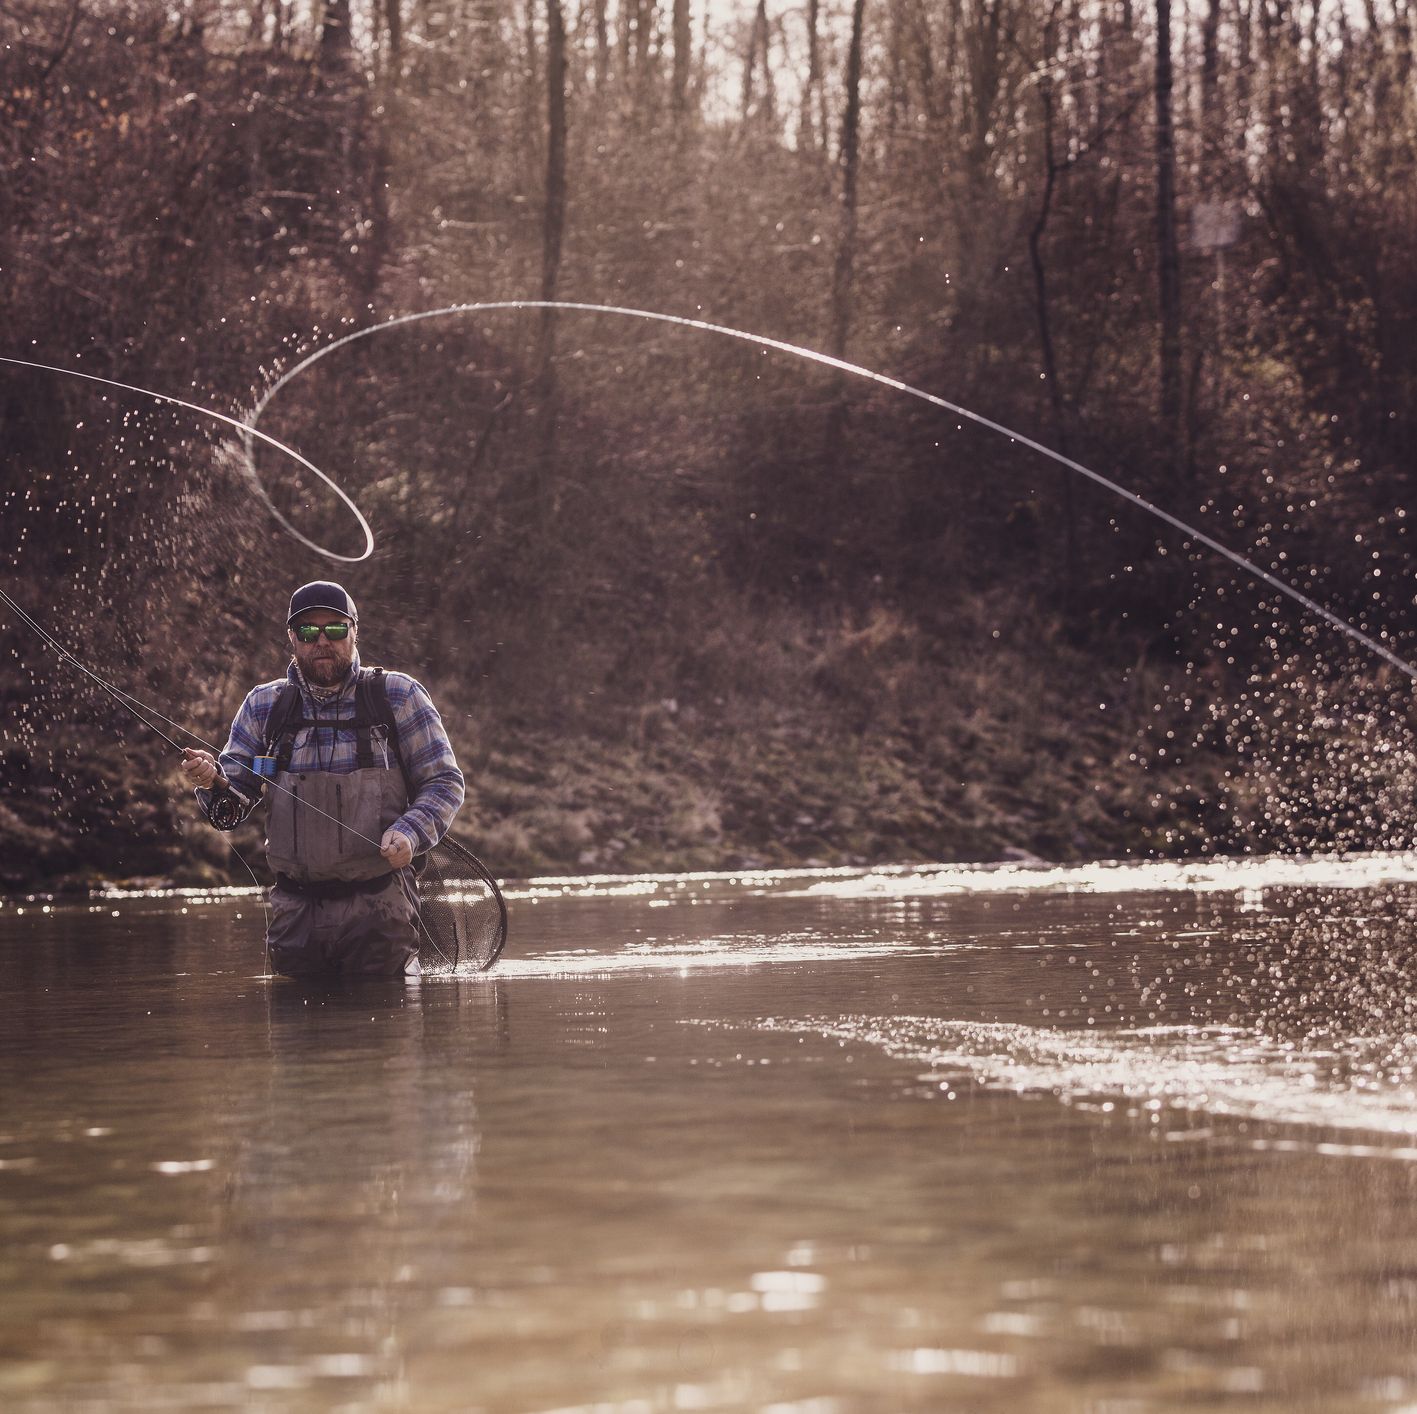 Level Up Your Fly Fishing Game With This Essential, Expert-Recommended Gear